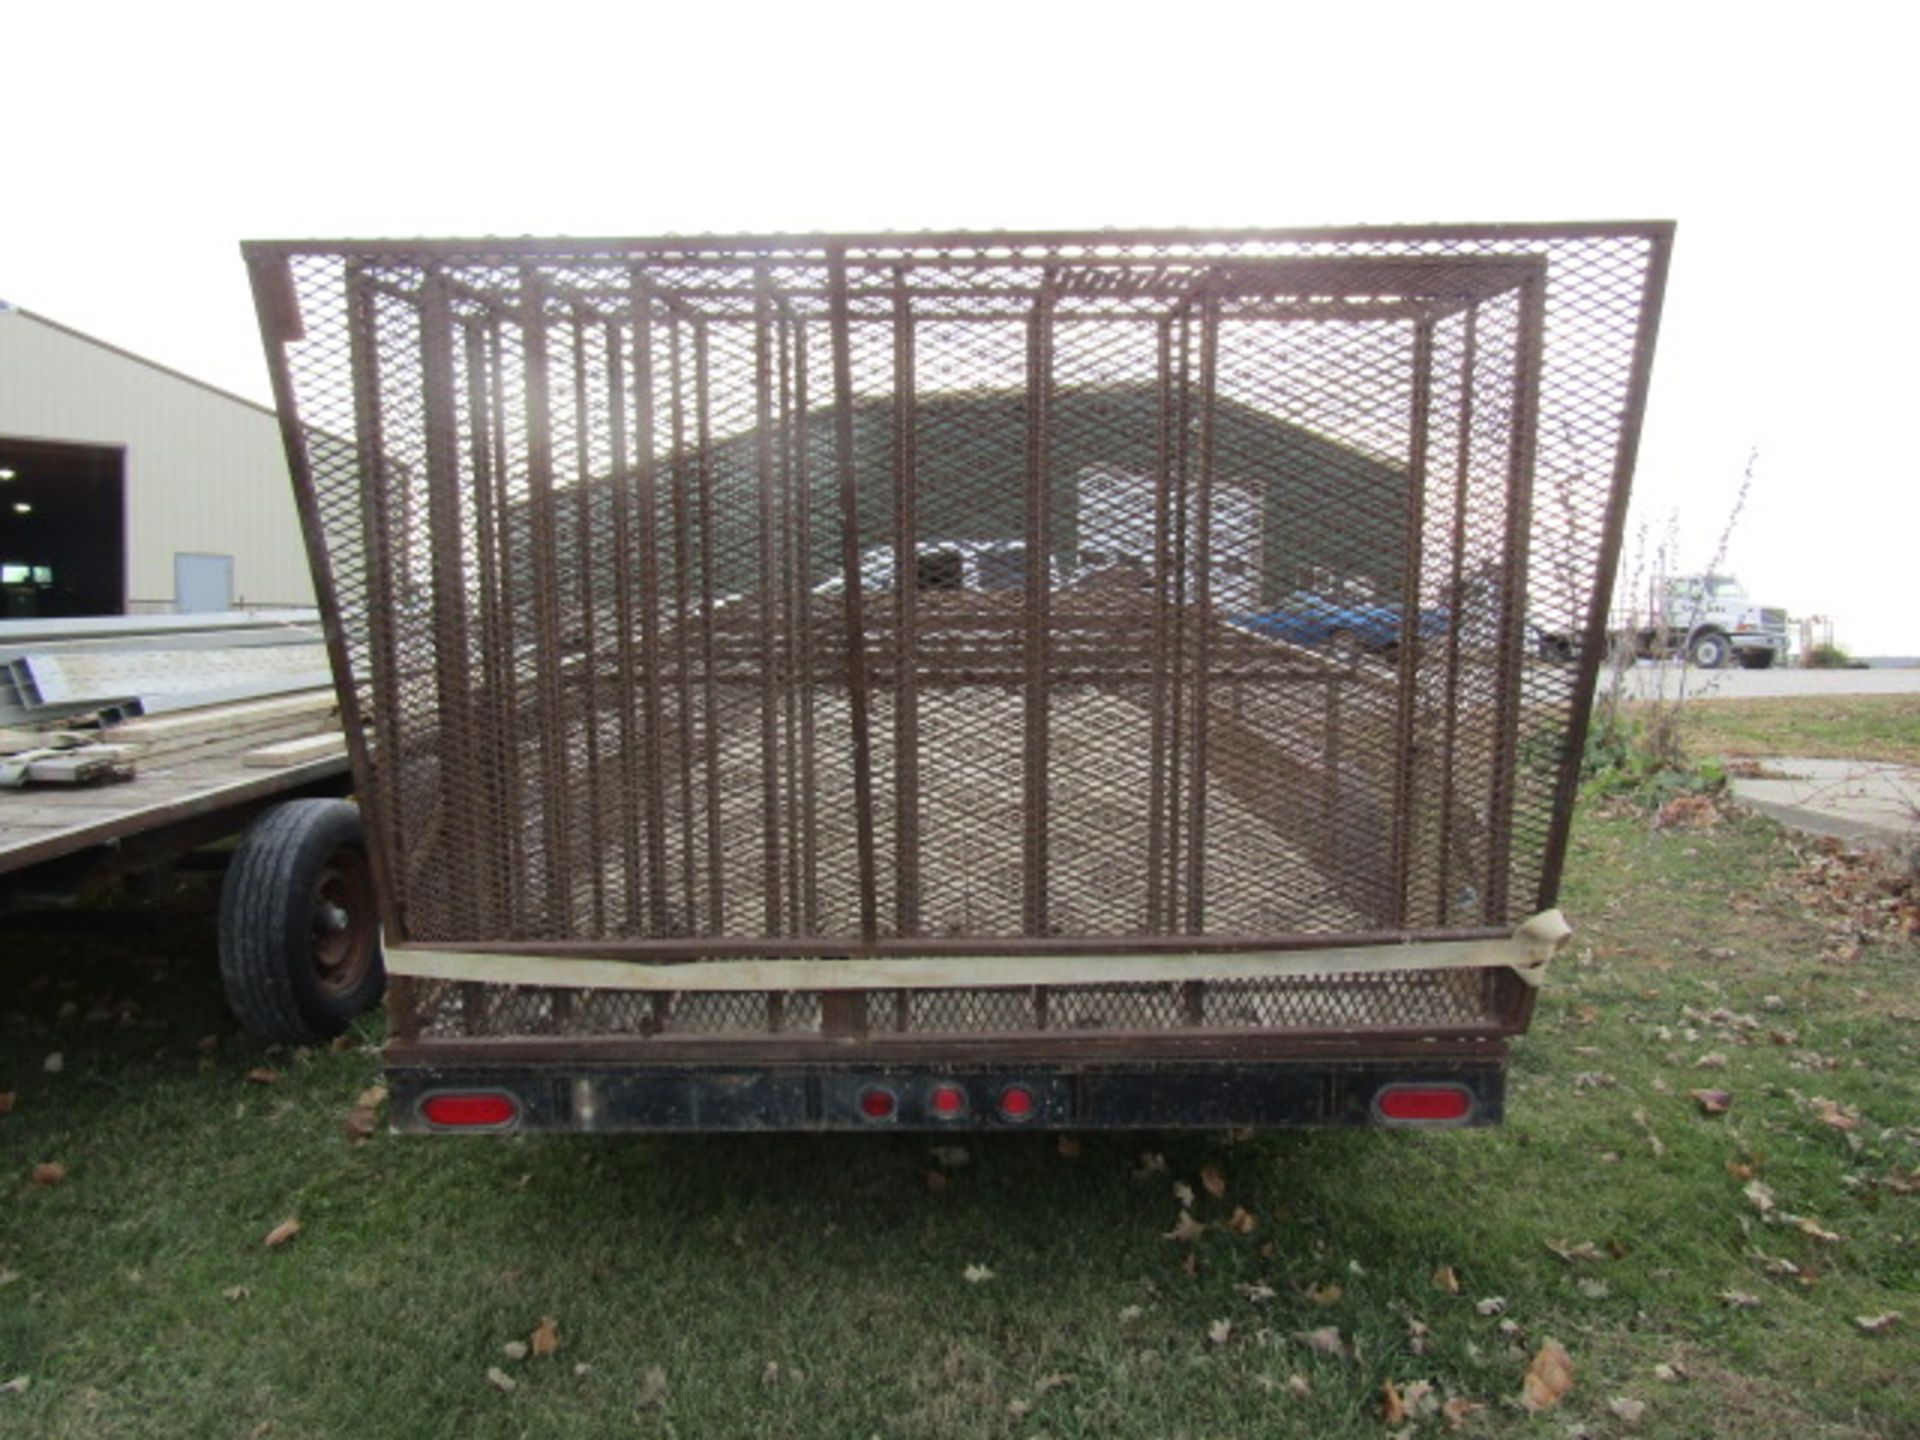 2006 Road Boss Tandem Axle Trailer, Wood Deck, Located in Winterset, IA - Image 5 of 6